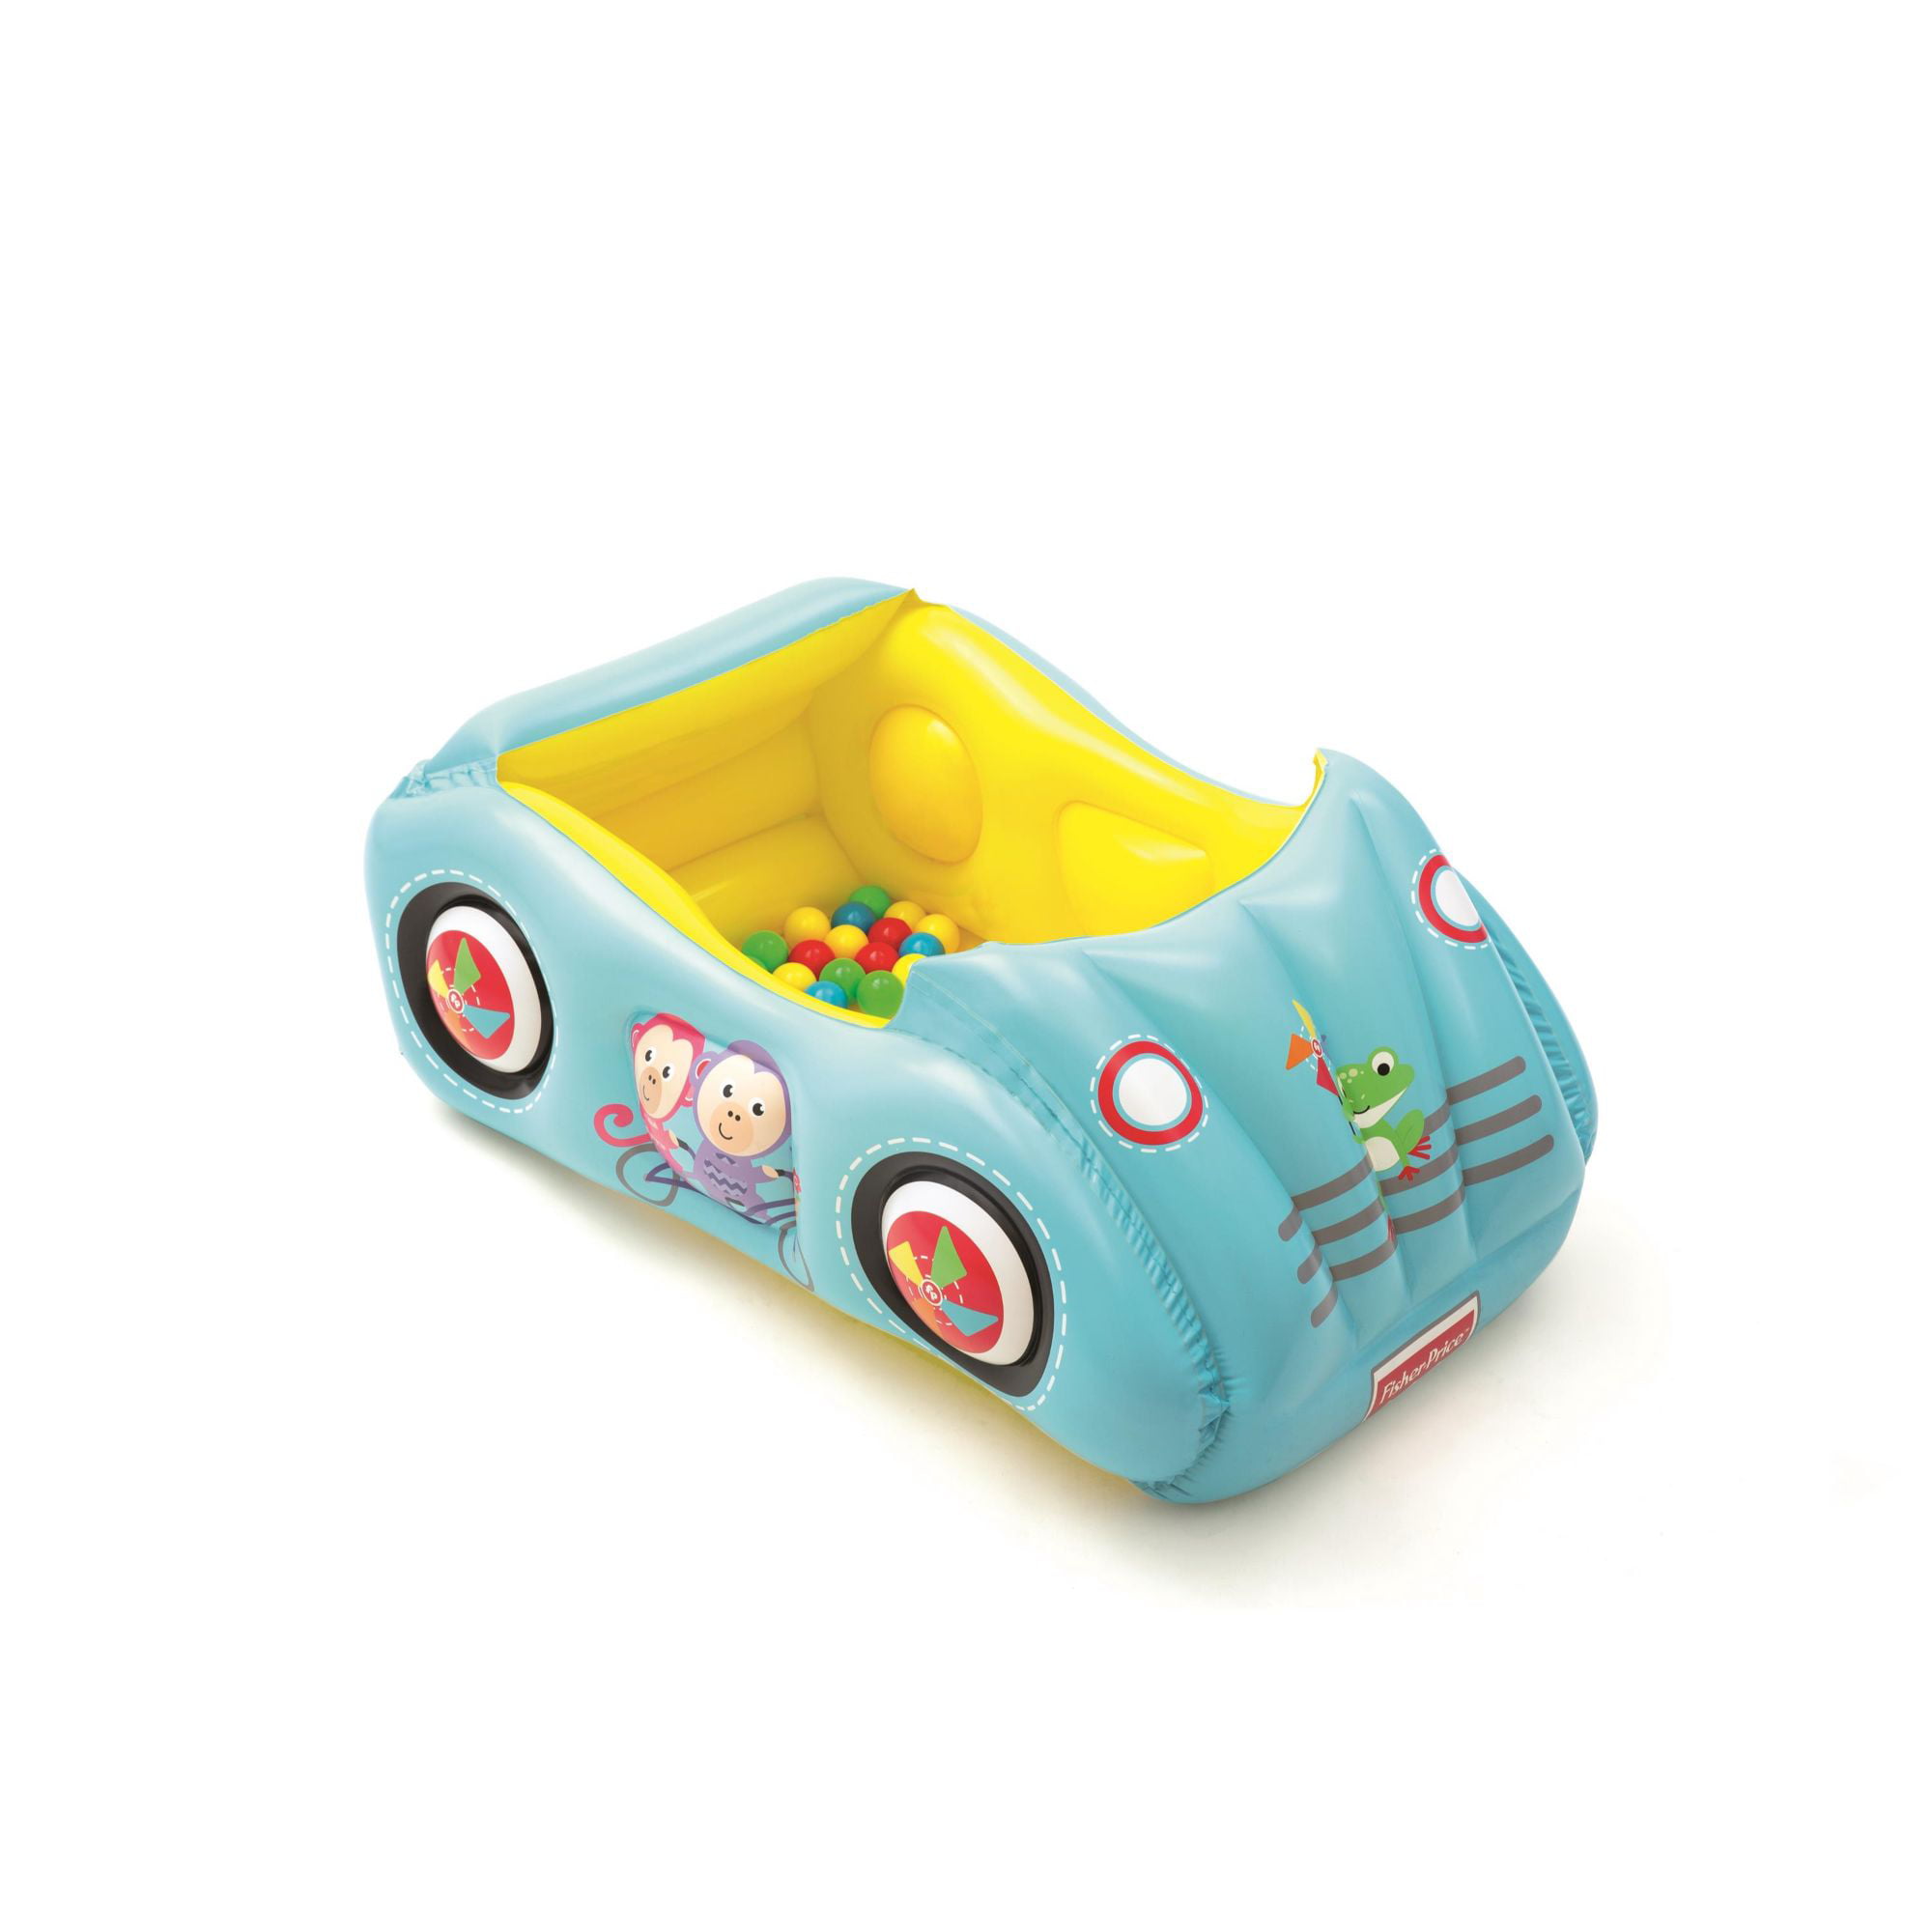 FisherPrice® Race Car Ball Pit with 25 MultiColored Play